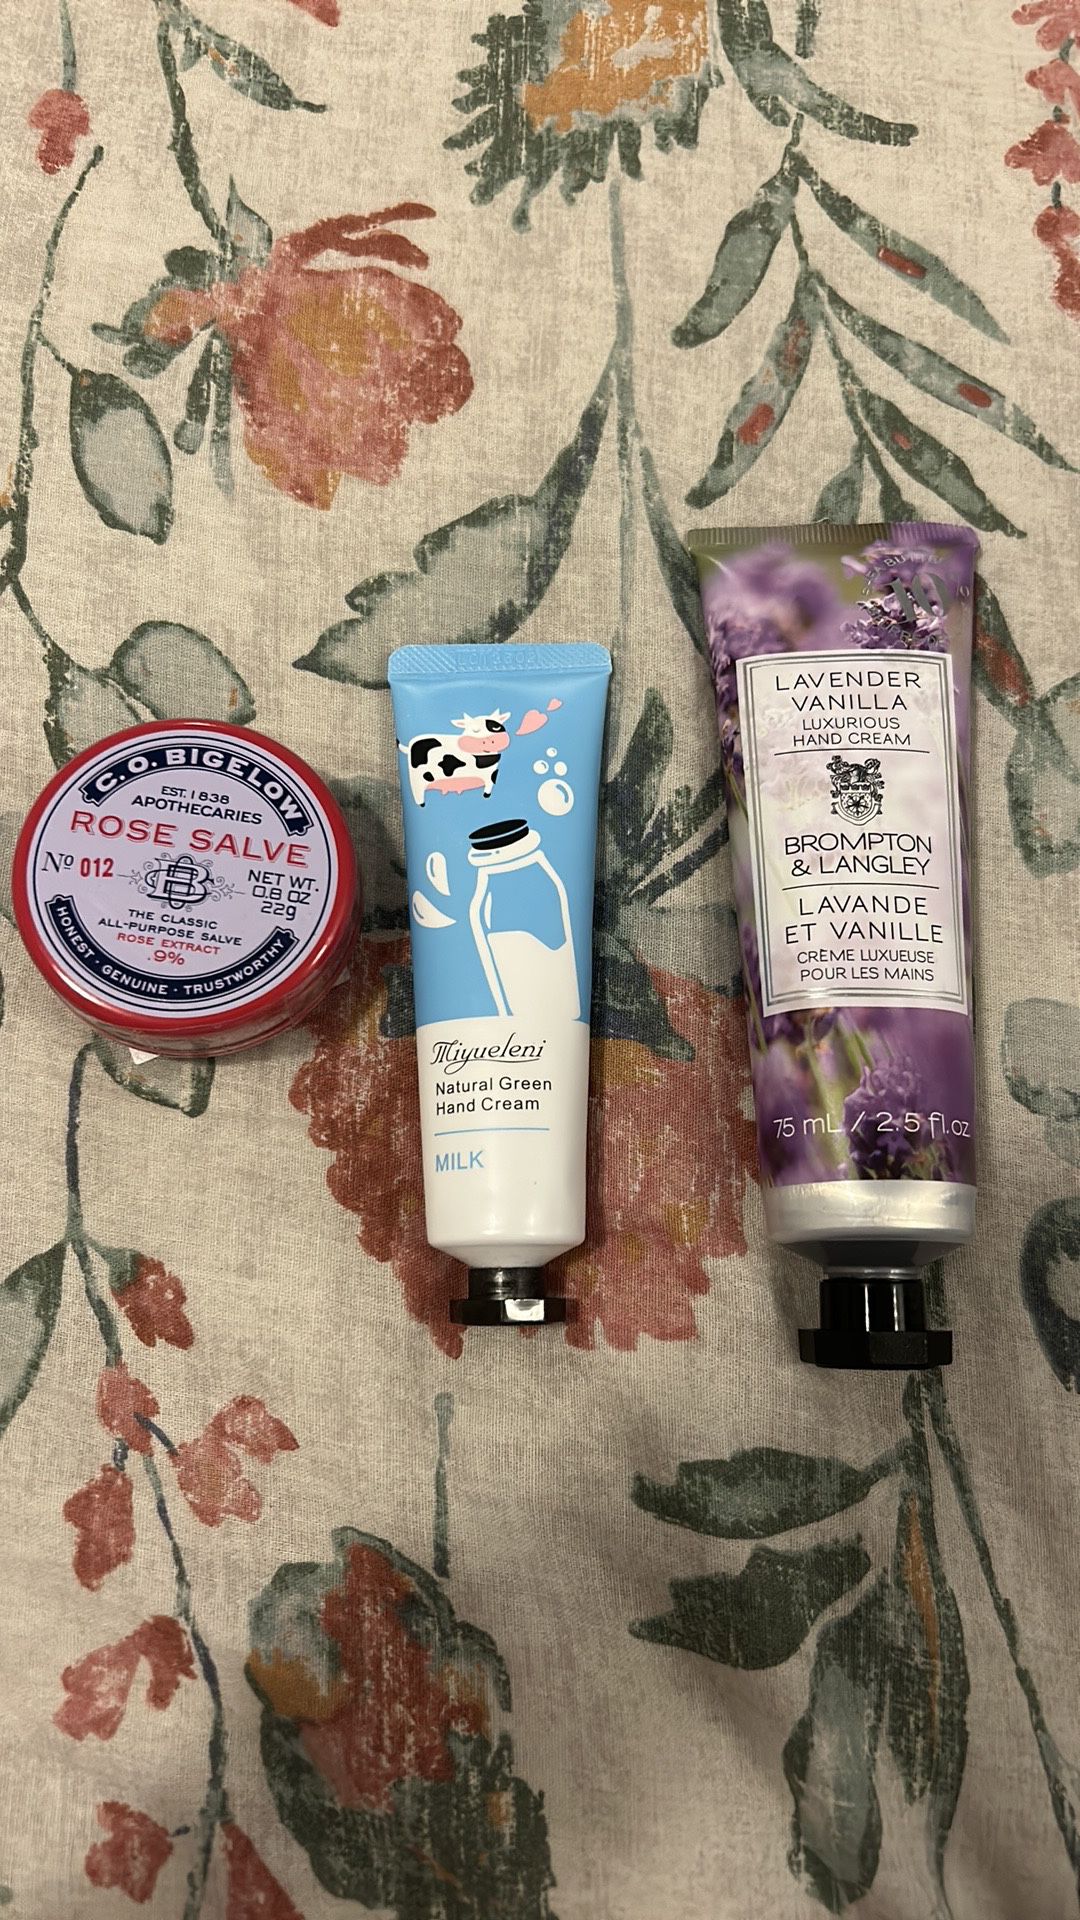 2 Hand Creams and Rose Salve